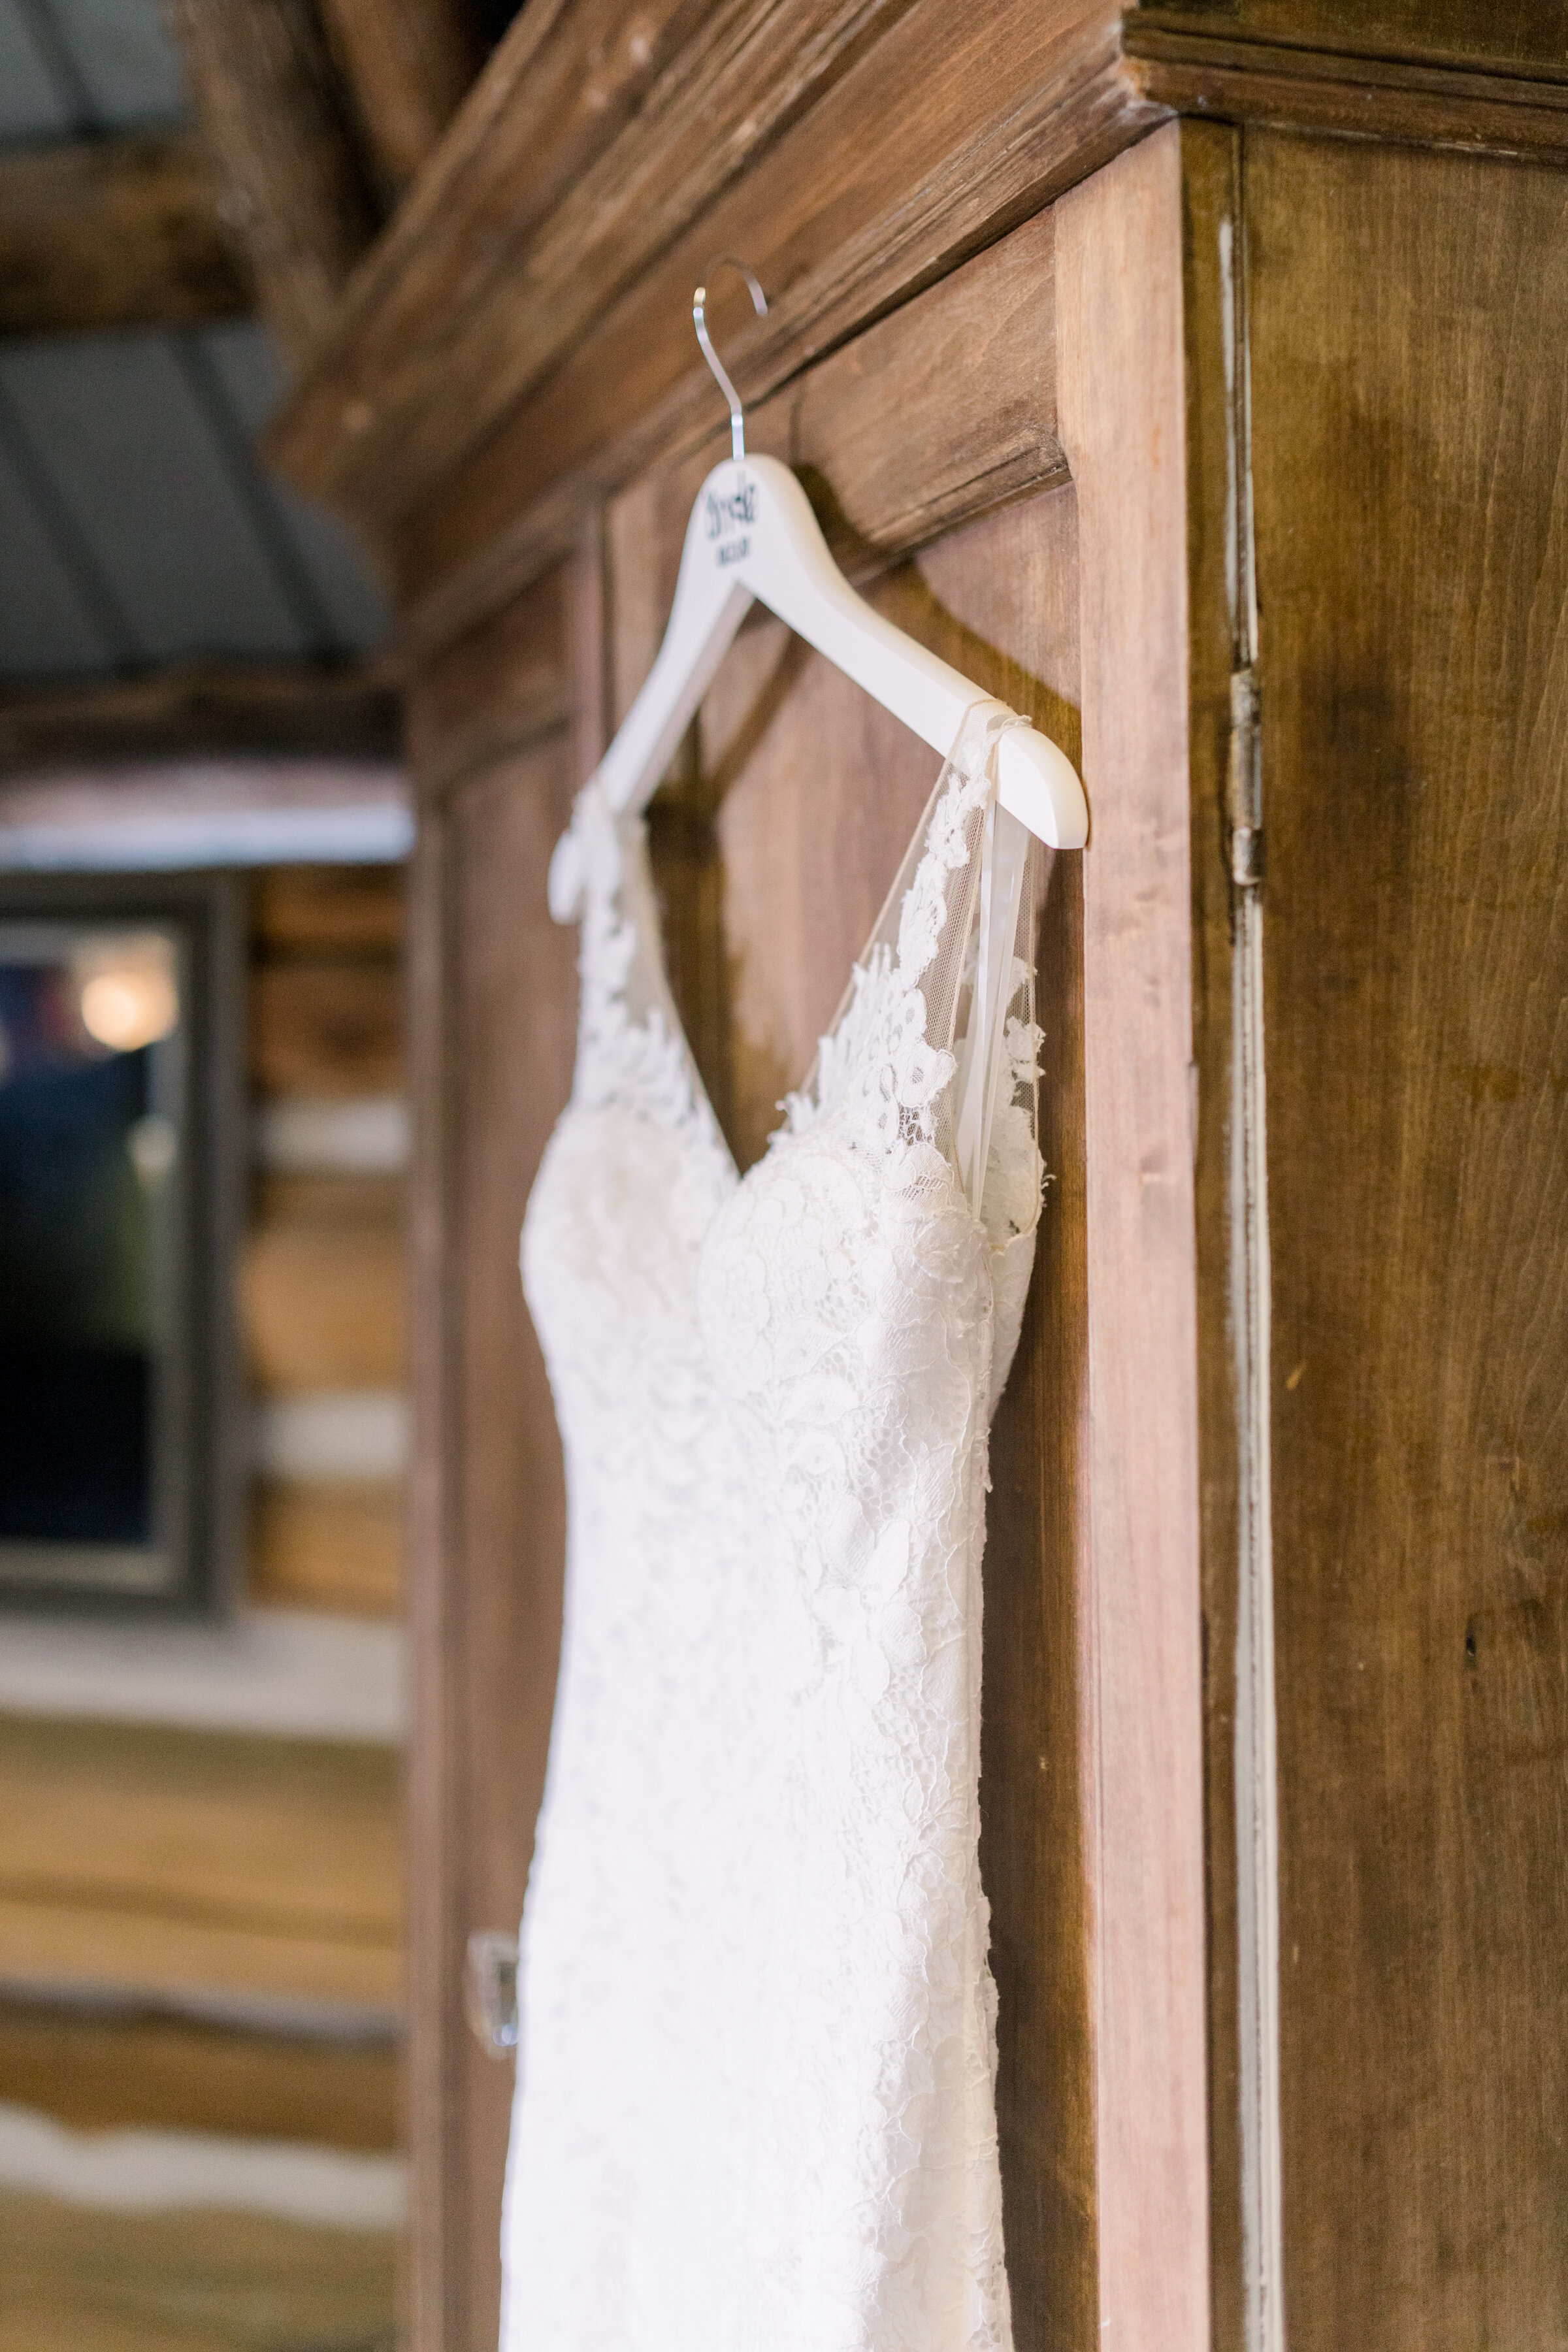  Gorgeous lace wedding dress with sheer tank sleeve and a v neck line by Chelsea Mason Photography in Ottawa, ON at The Herb Garden. wedding venues in ottawa best outdoor wedding locations in ottawa wedding dress inspo lace wedding dress best wedding